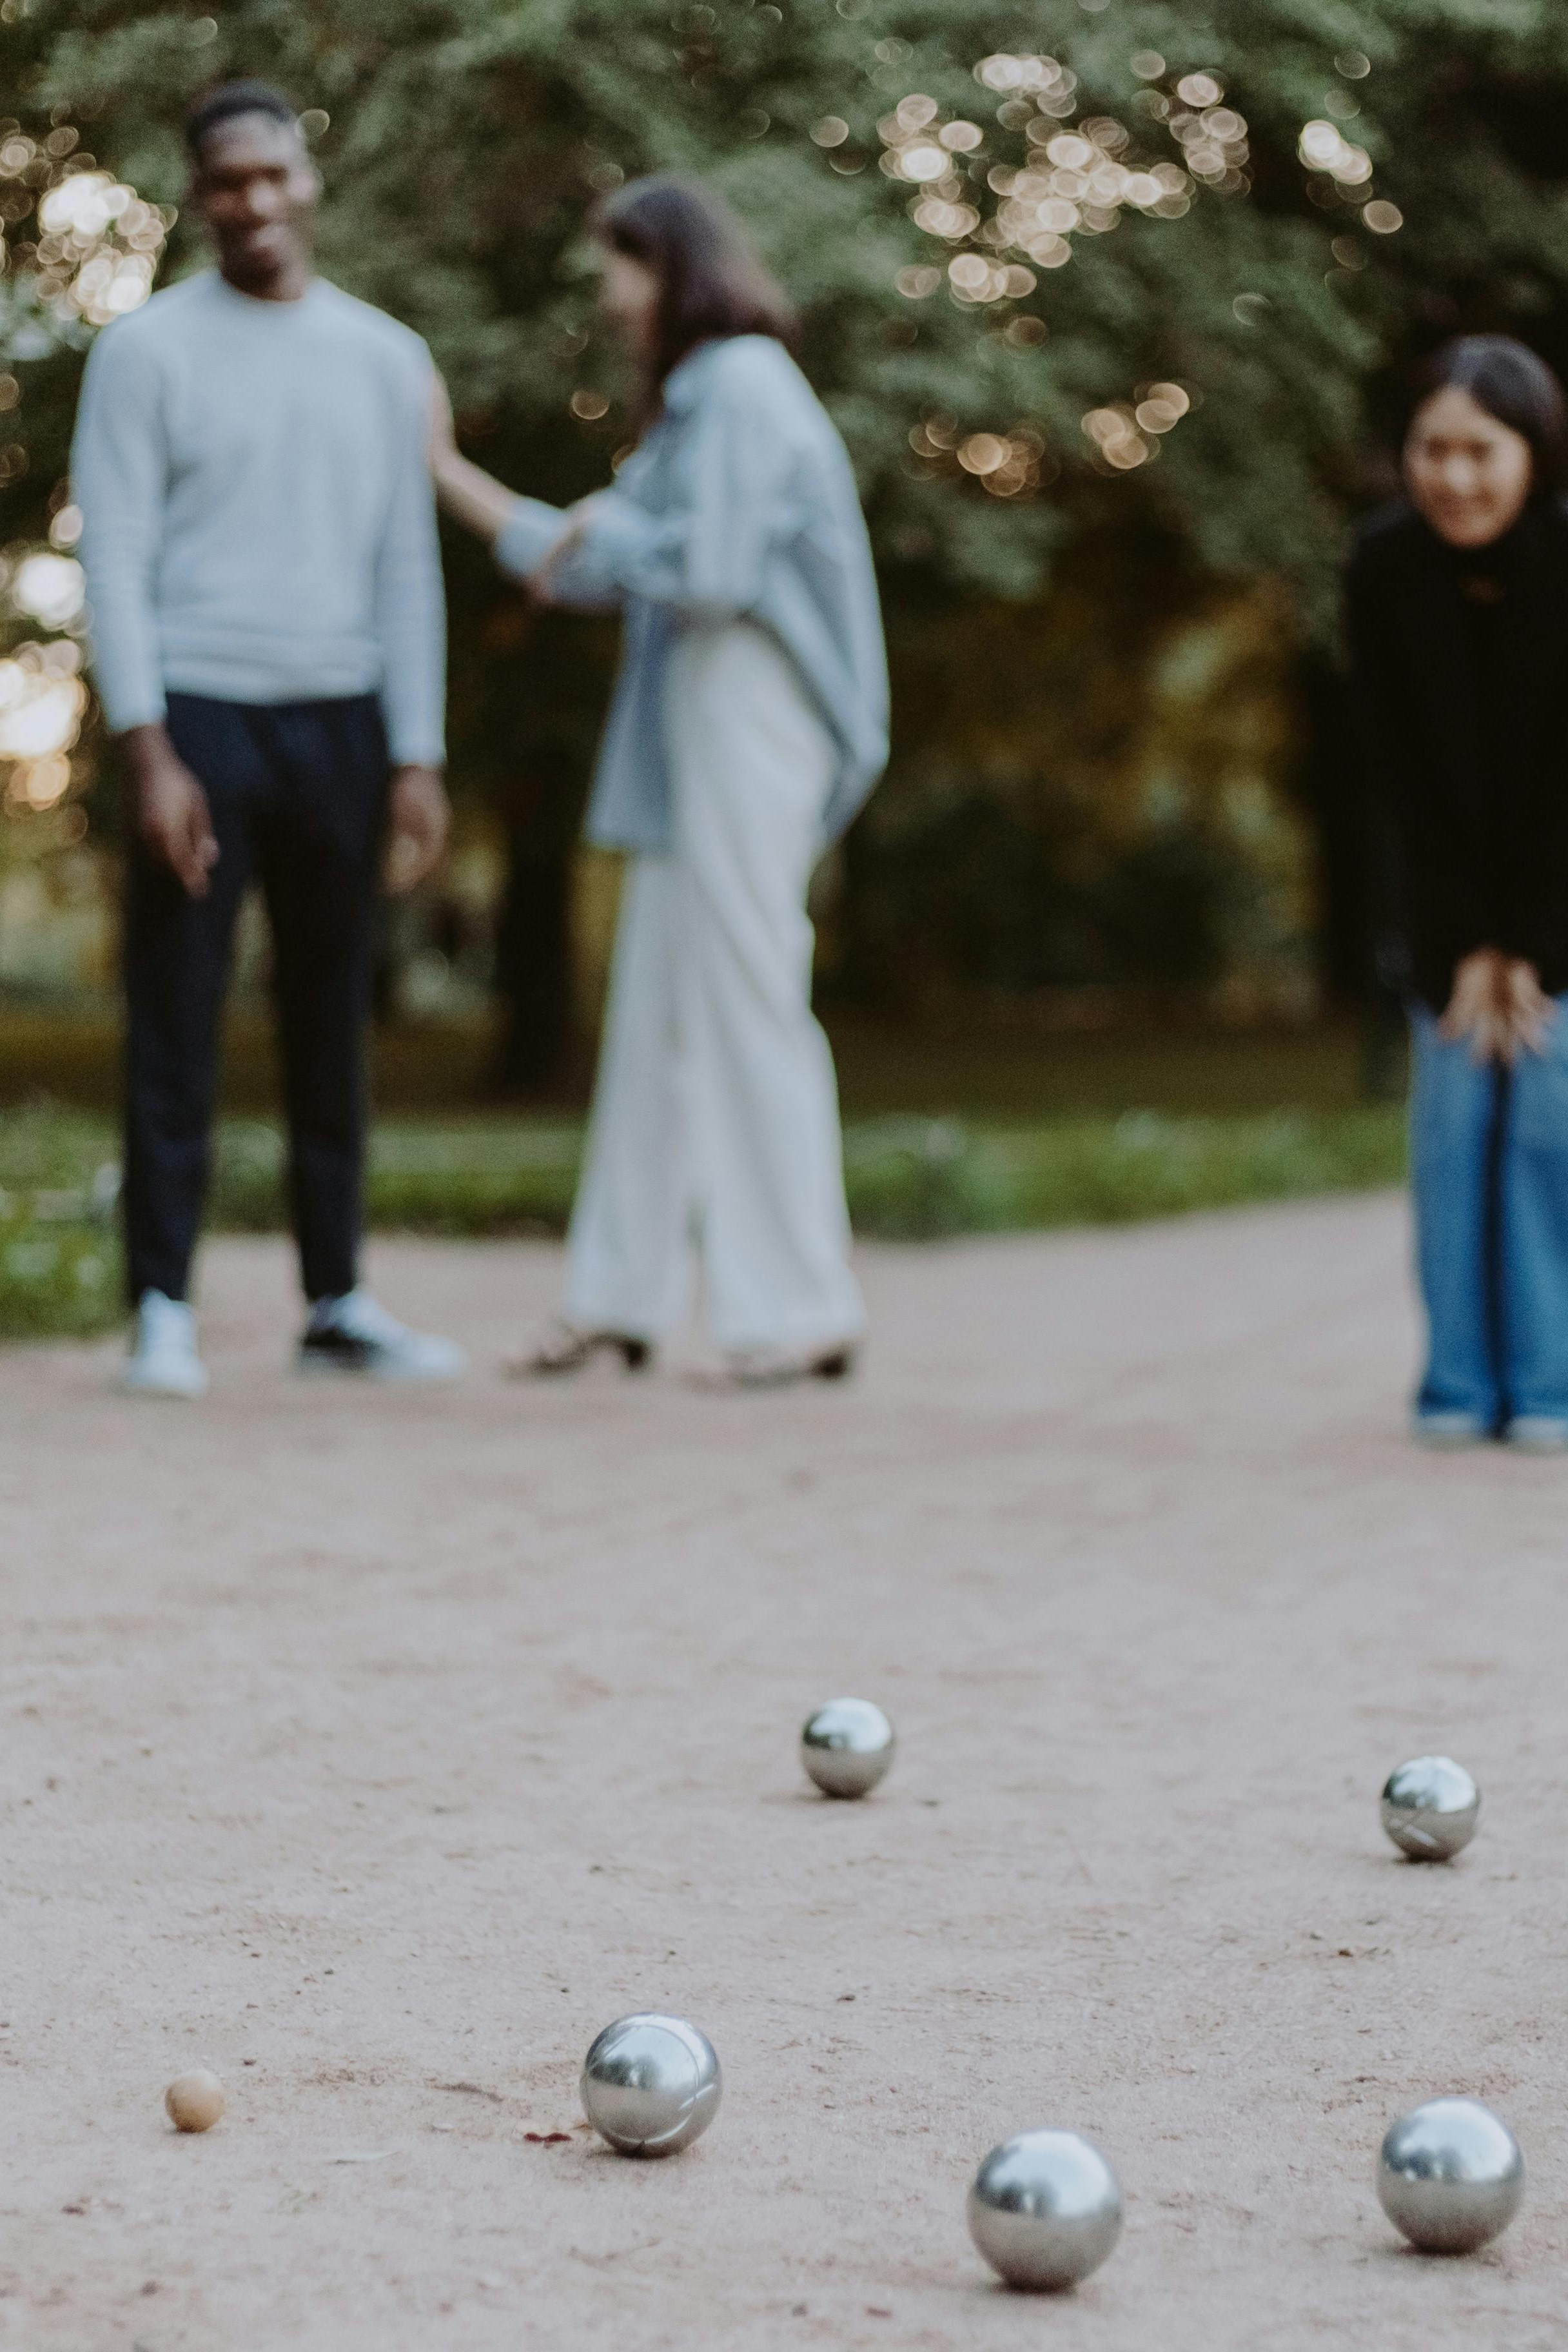 Petanque balls on a field with people blurry in the back.